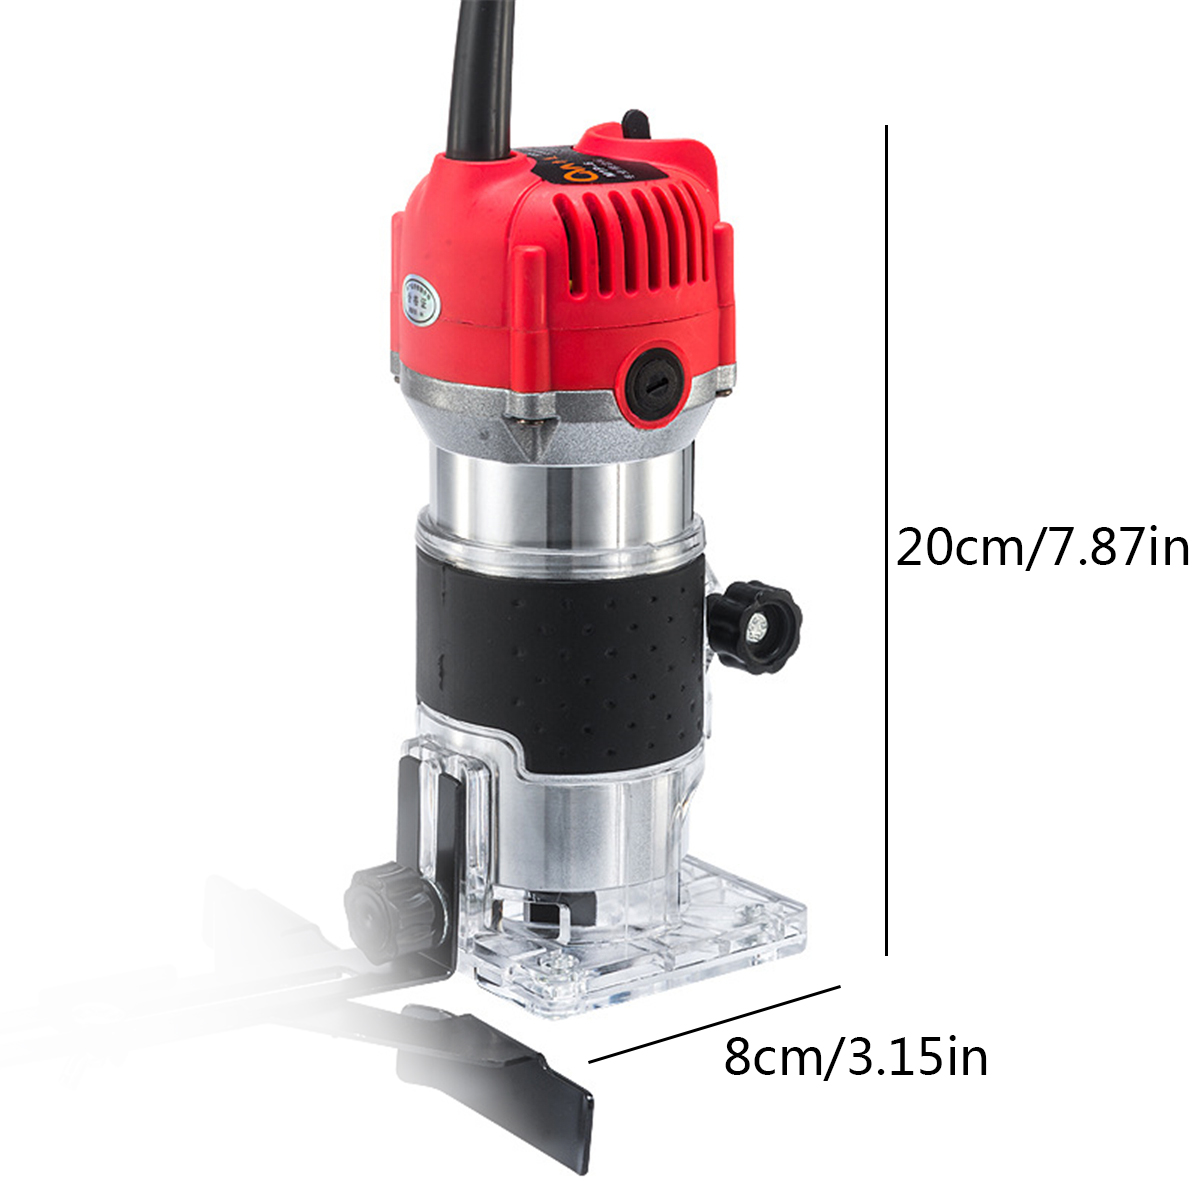 110V220V-20000rpm-Electric-Hand-Trimmer-Router-Wood-Laminate-Palm-Joiners-Working-Cutting-Tool-1821827-11